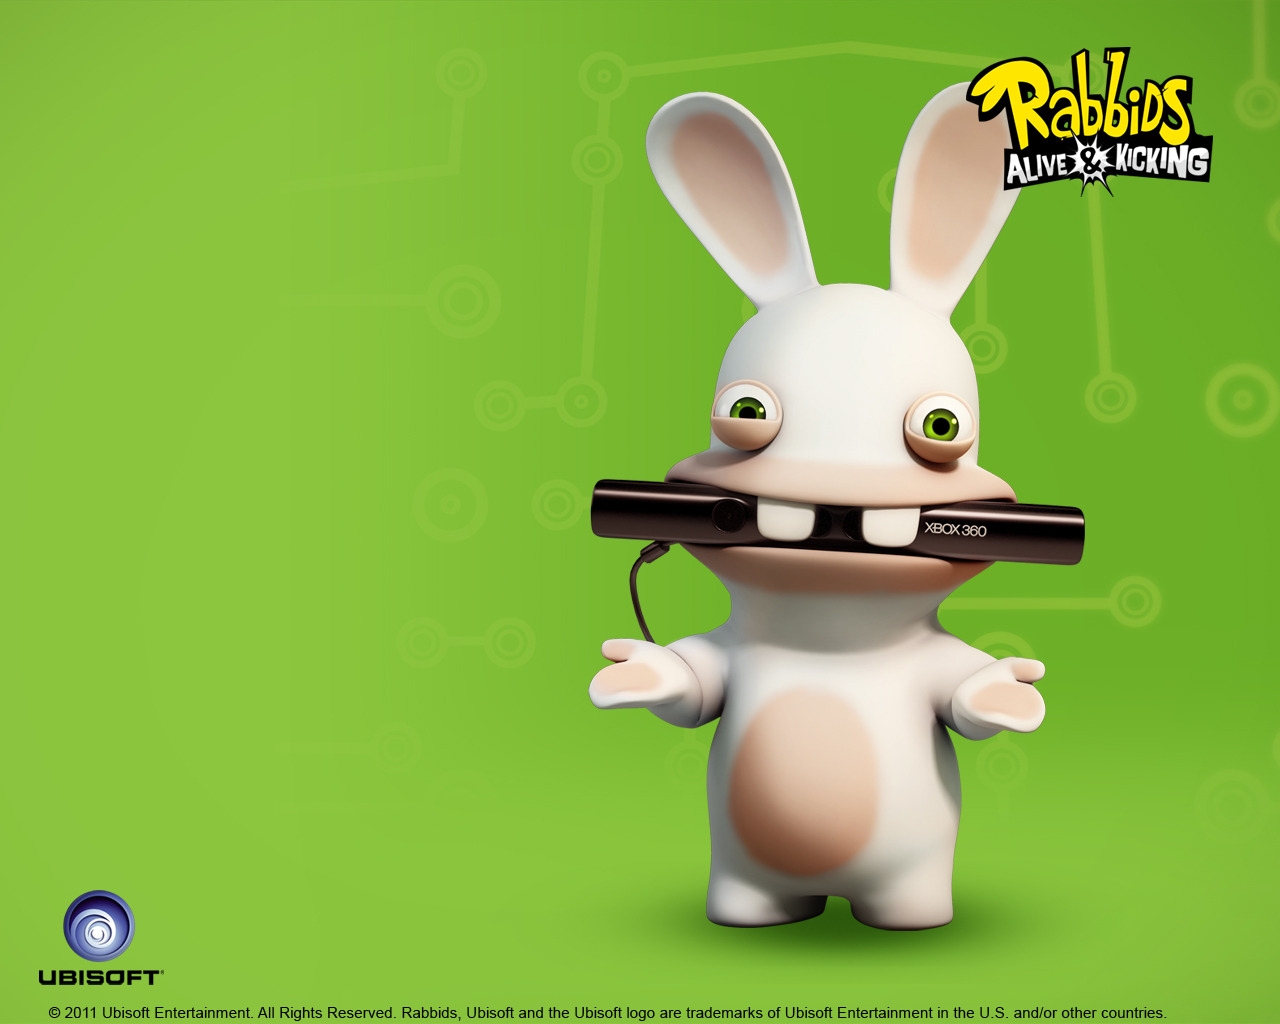 Rabbids Alive and Kicking Game for 1280 x 1024 resolution